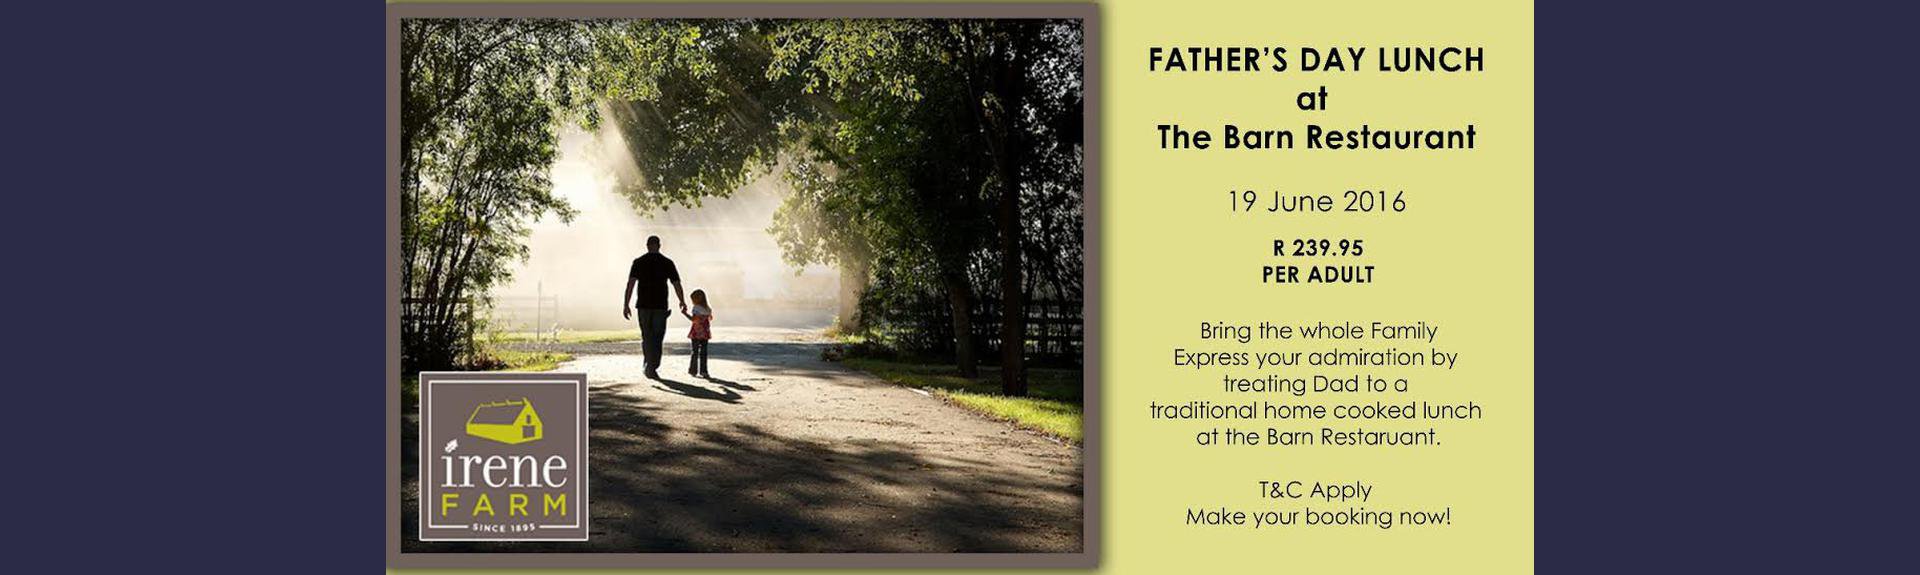 Father’s Day Lunch Buffet at The Barn Restaurant